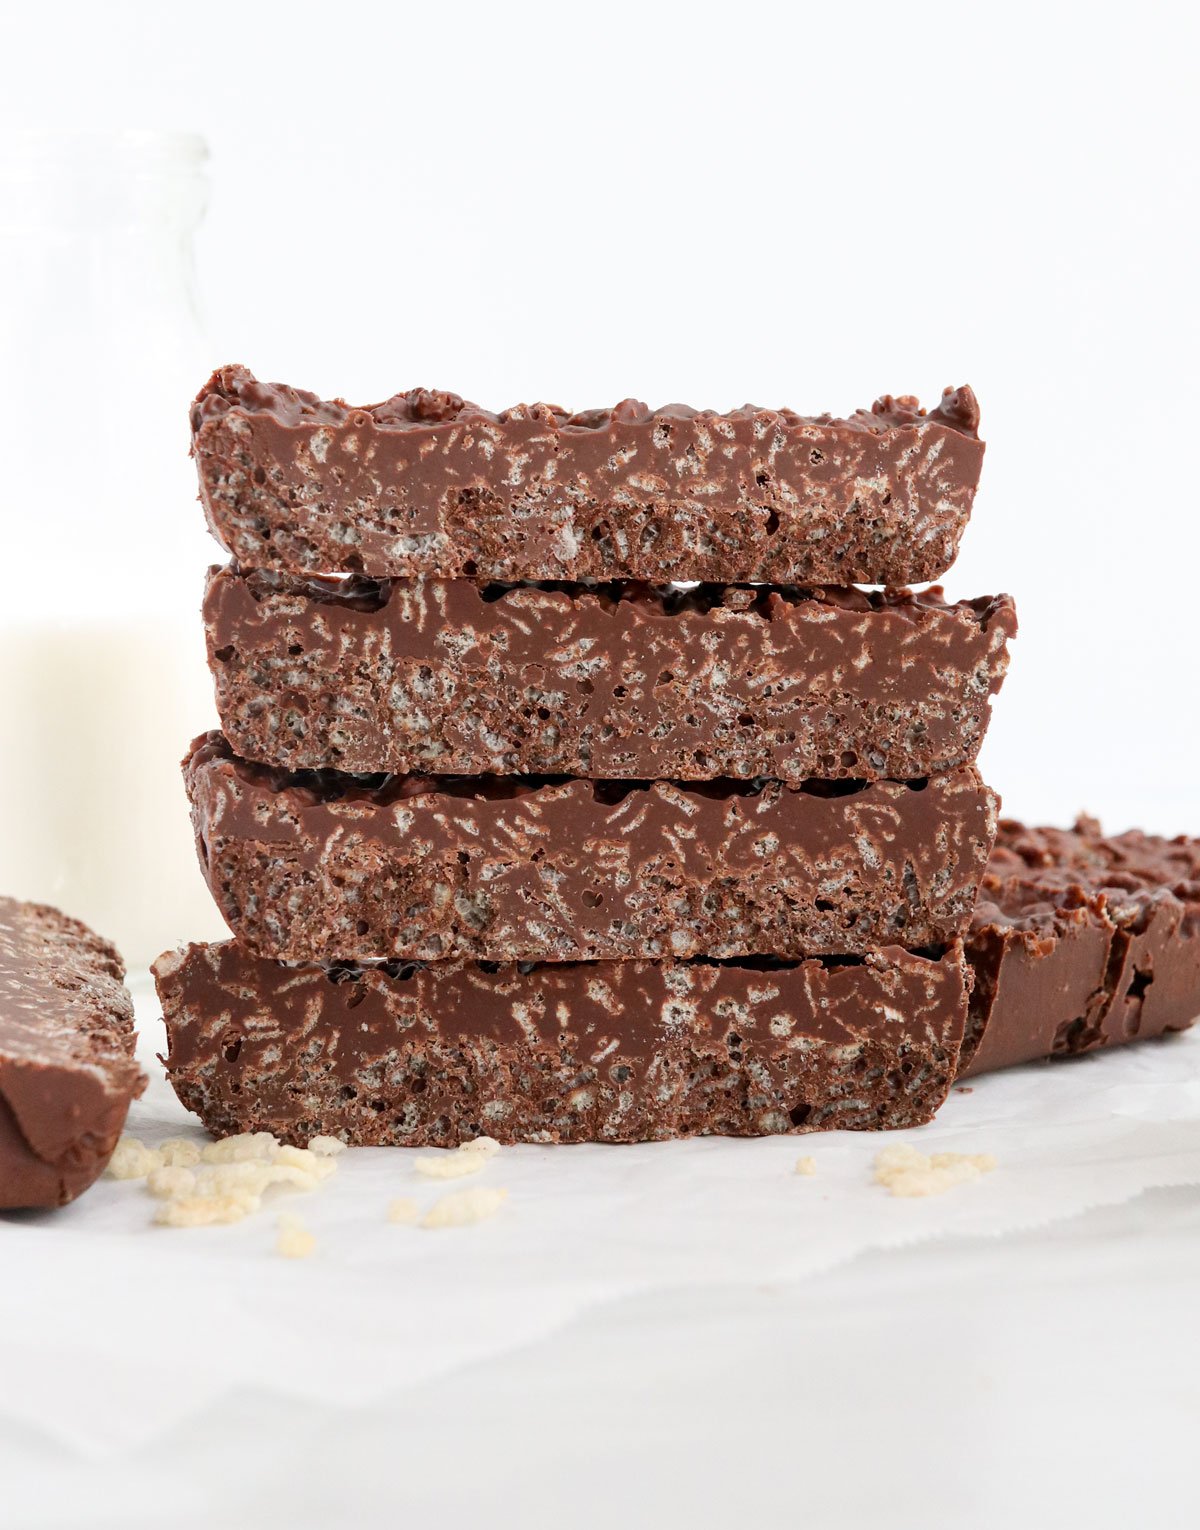 crunch bars stacked to show interior texture.